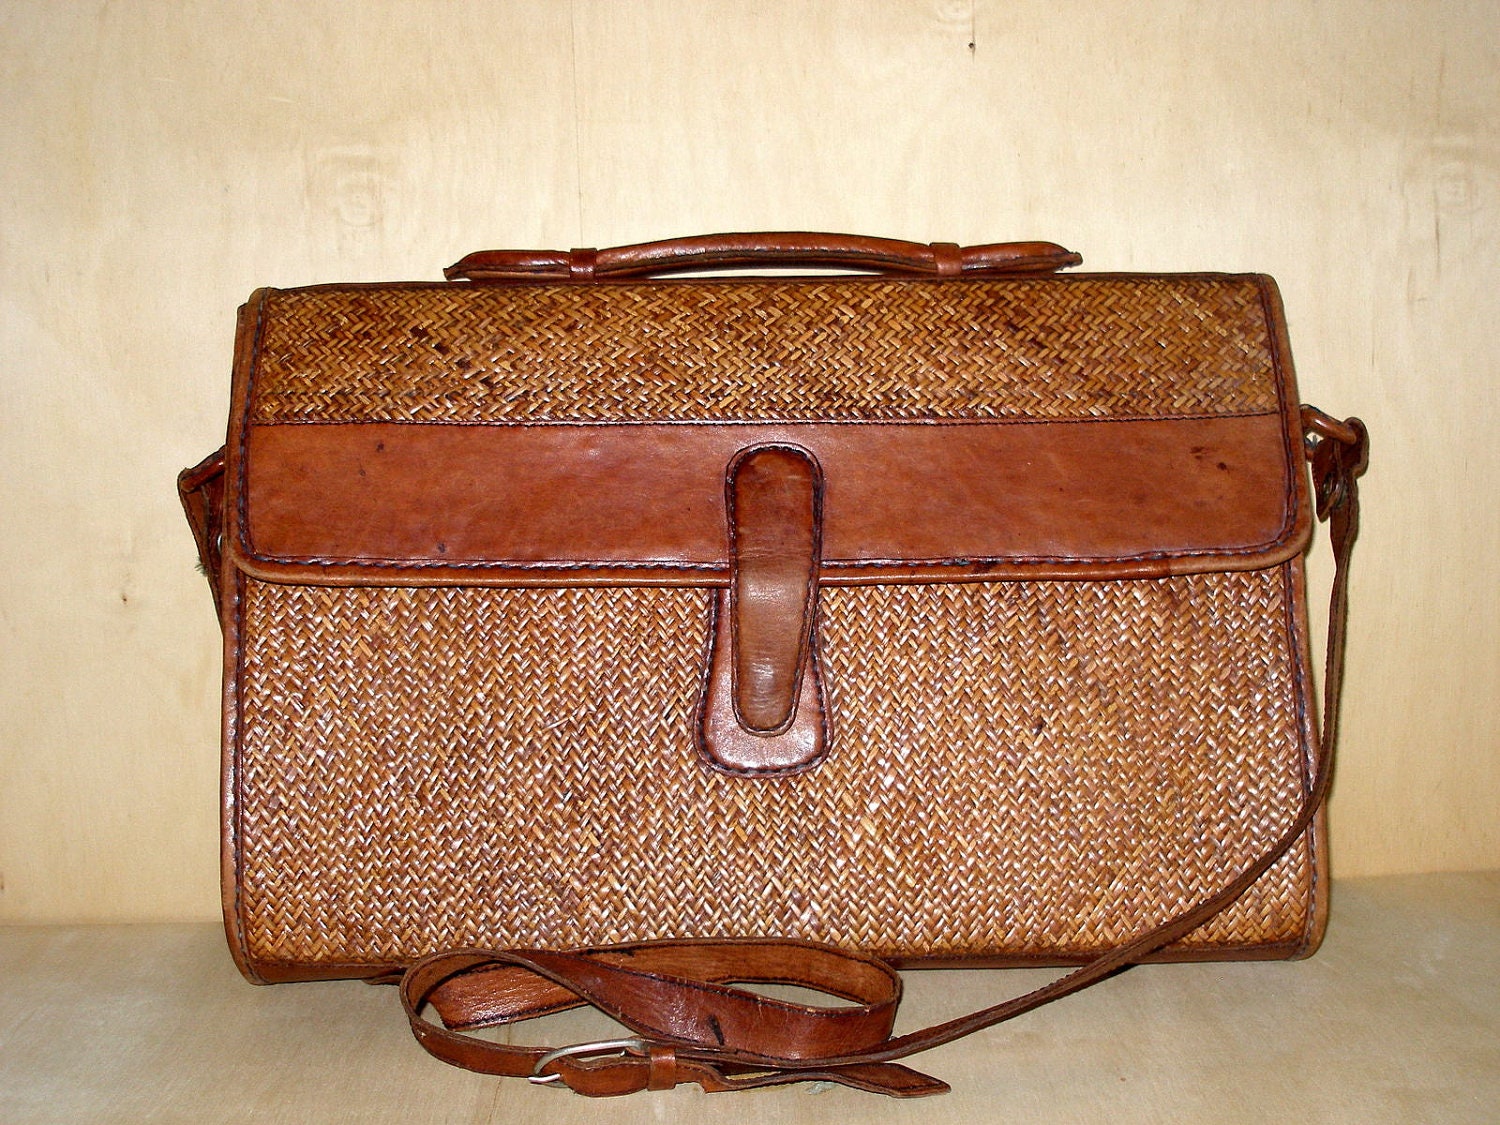 Vintage Leather and Rattan Satchel Briefcase Bag by FultonLane